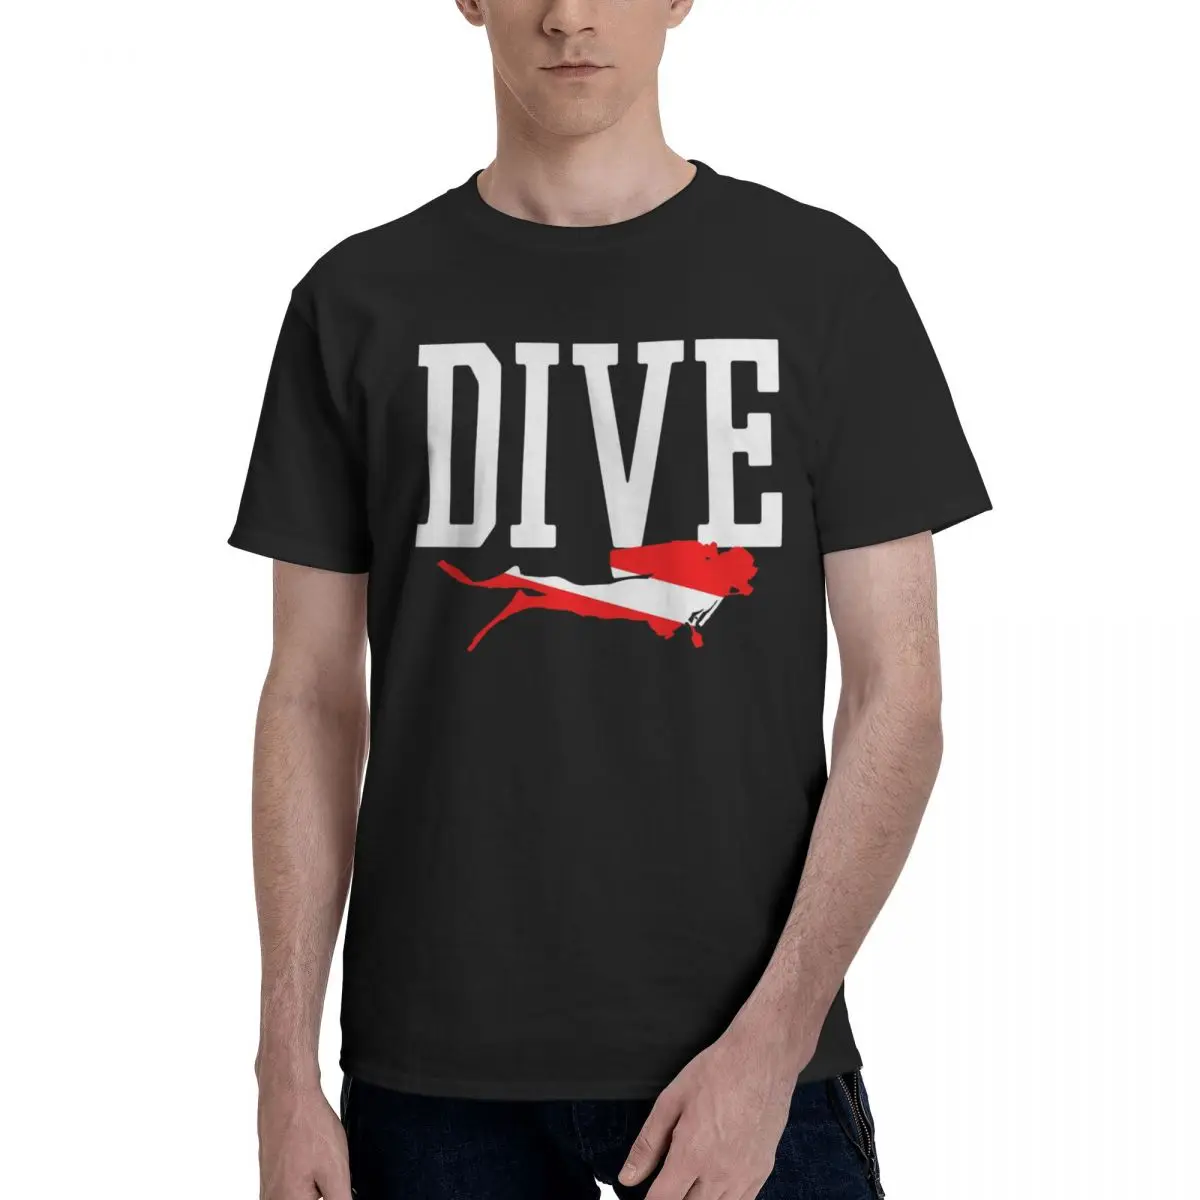 

Divin Scuba Diving 4 Adult T-shirt Harajuku Tees Graphic Vintage Funny Joke Top quality Fitness USA Size